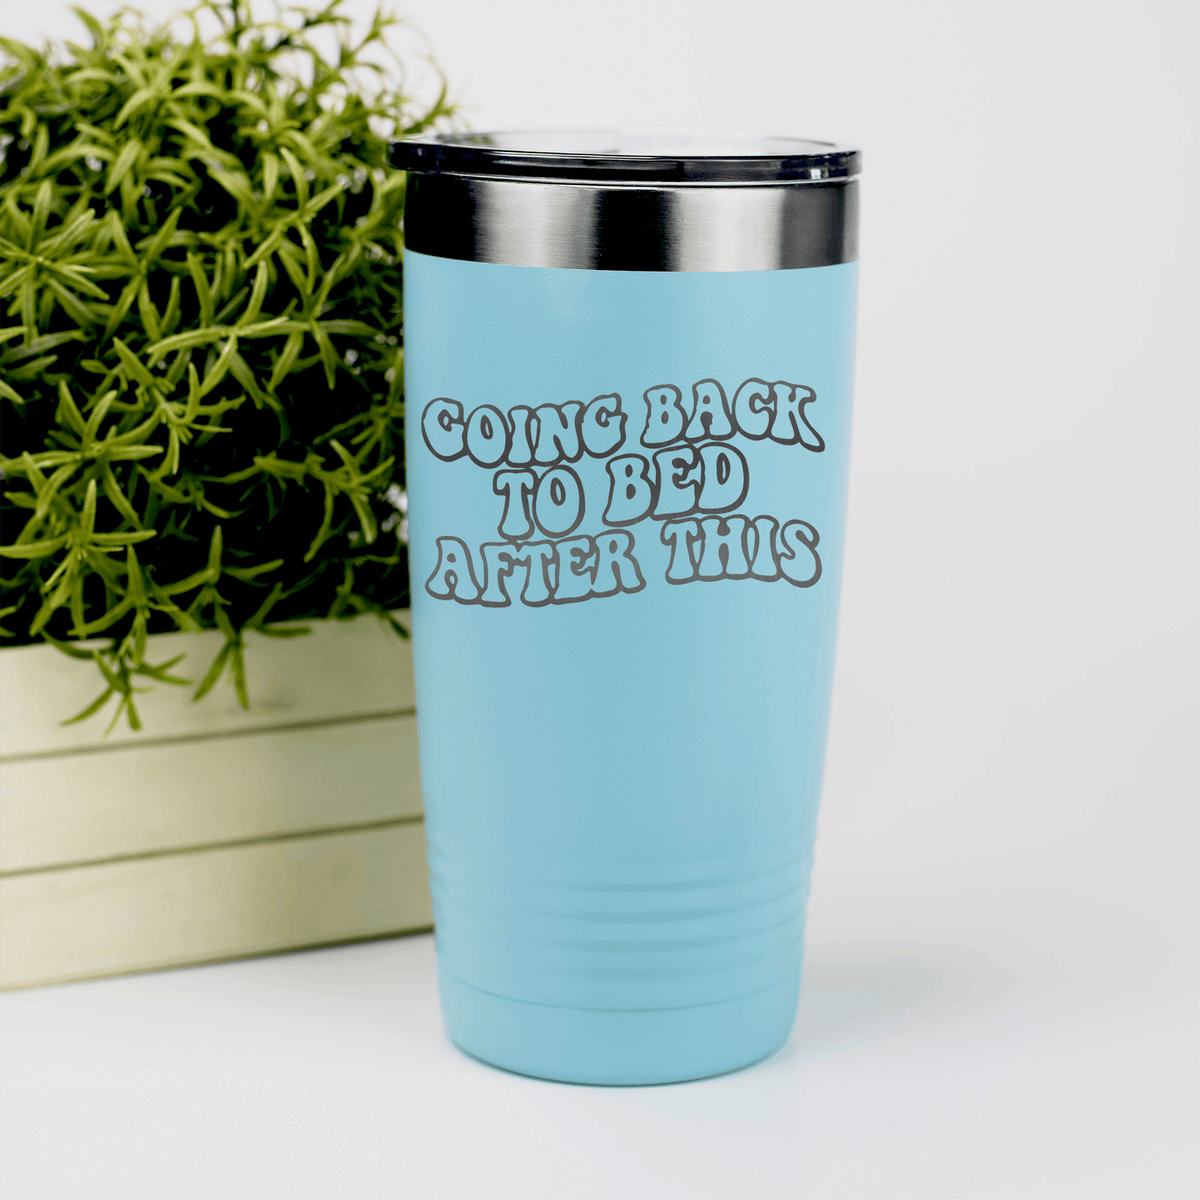 Teal pickelball tumbler Going Back To Bed